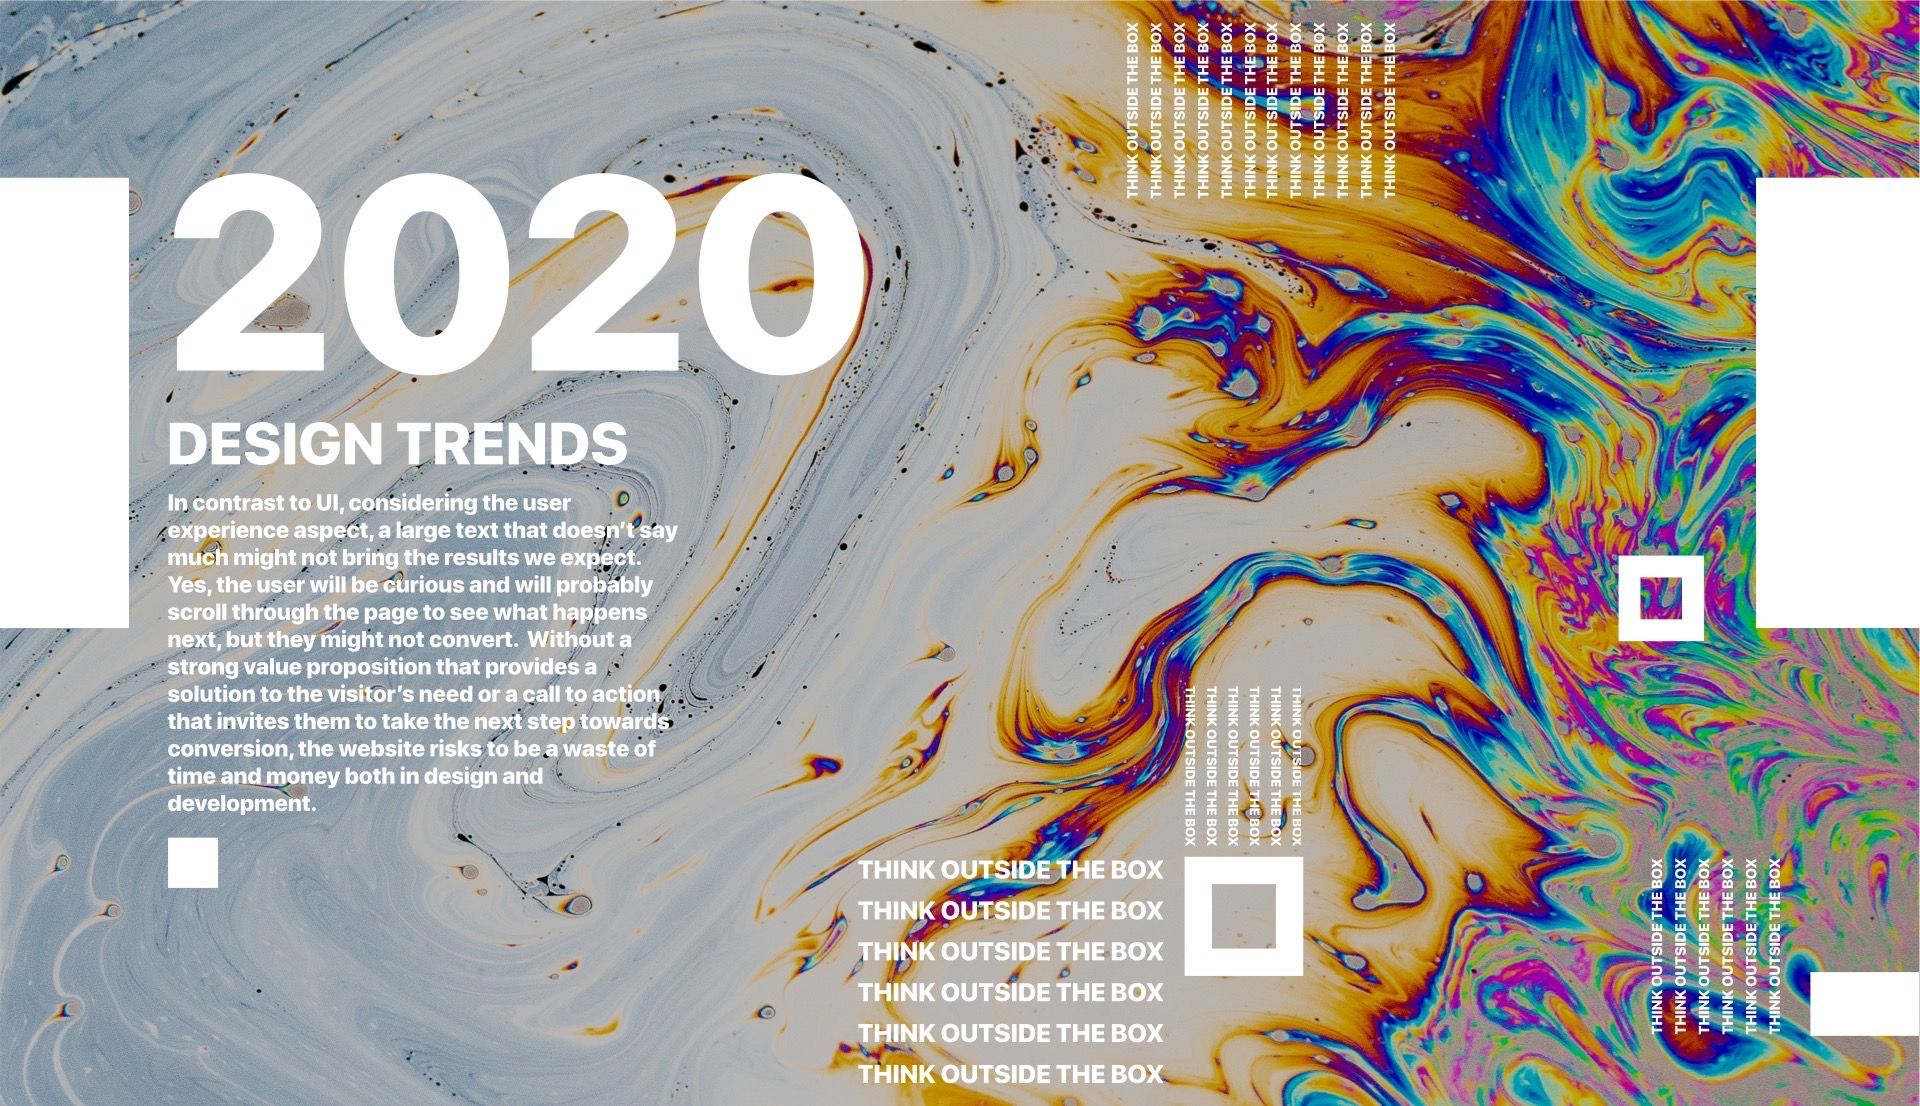 Design Trends 2020: Outside the box